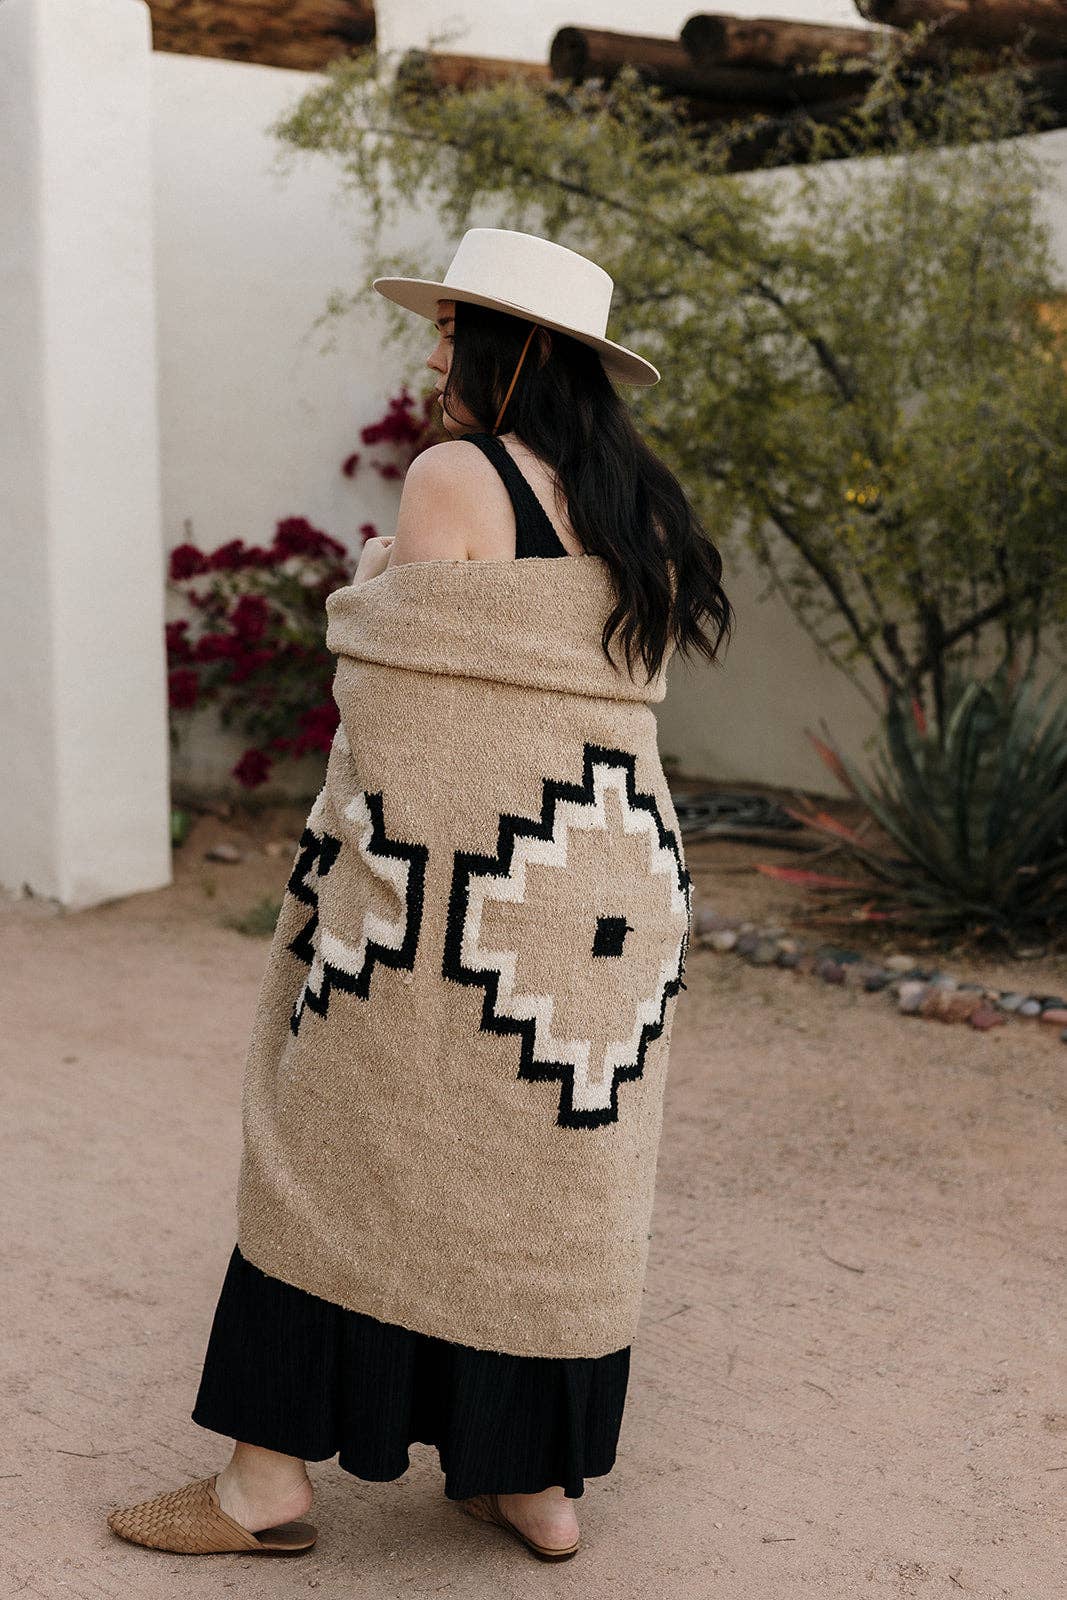 Tres Cruces Handwoven Blanket by Tribe and True